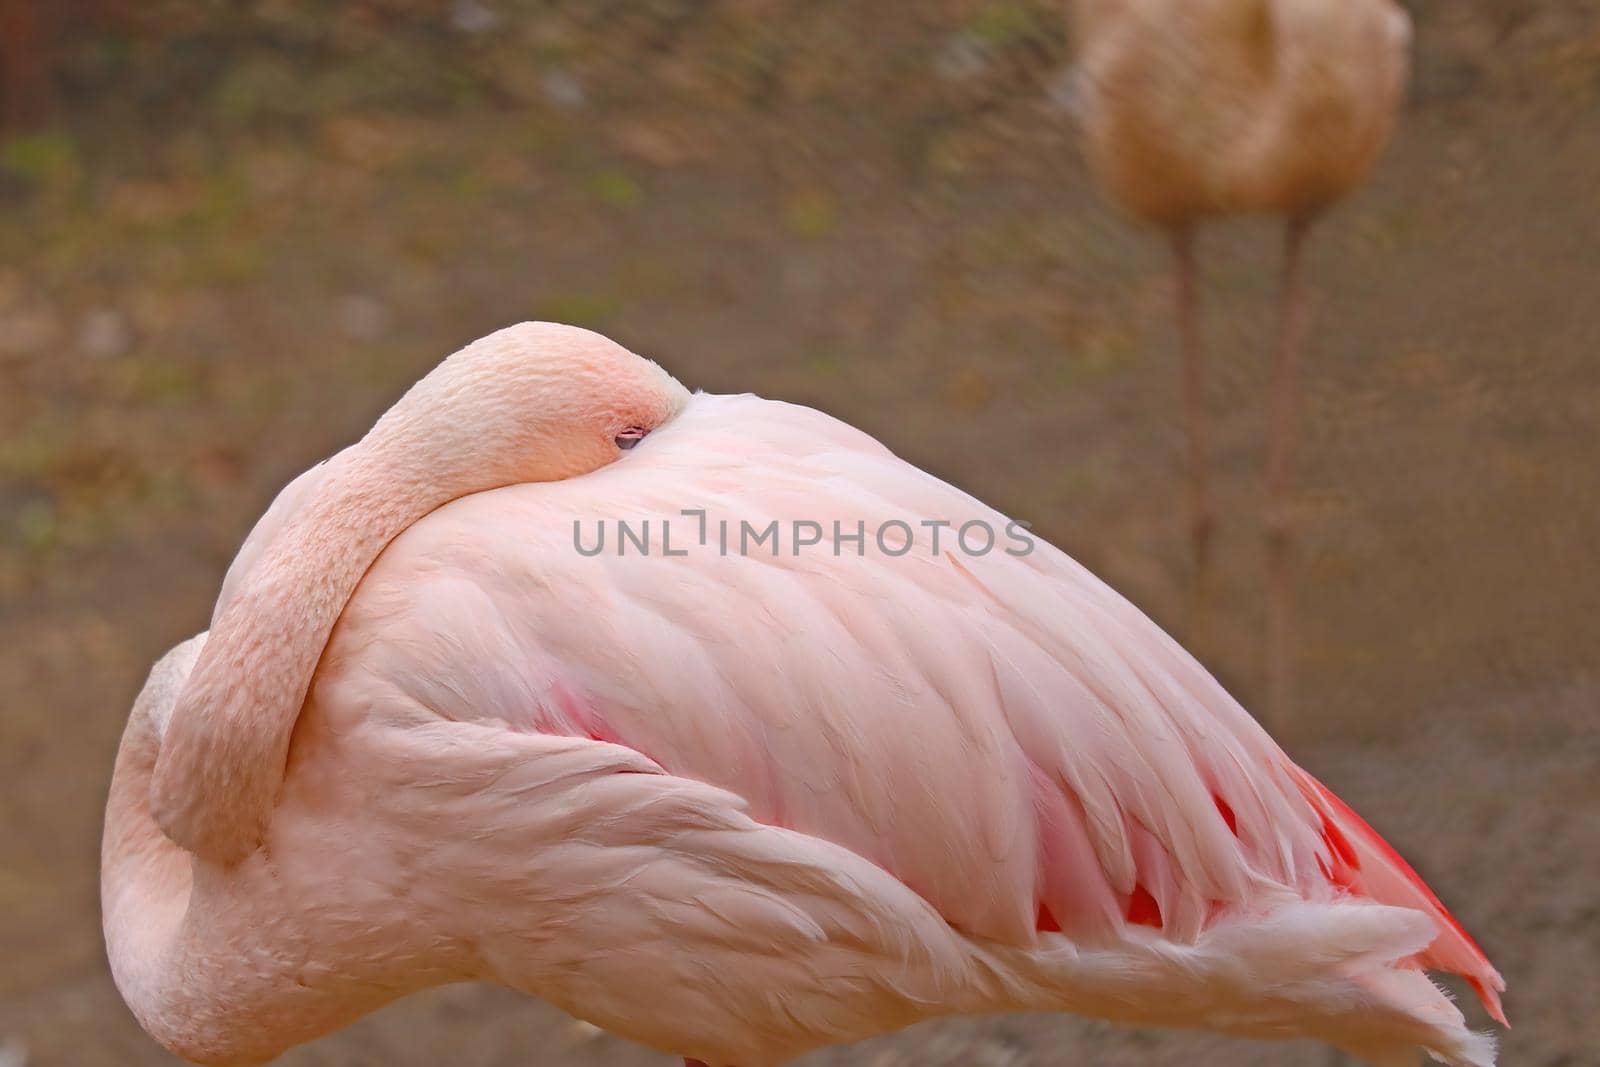 The flamingo hid its beak under the feathers